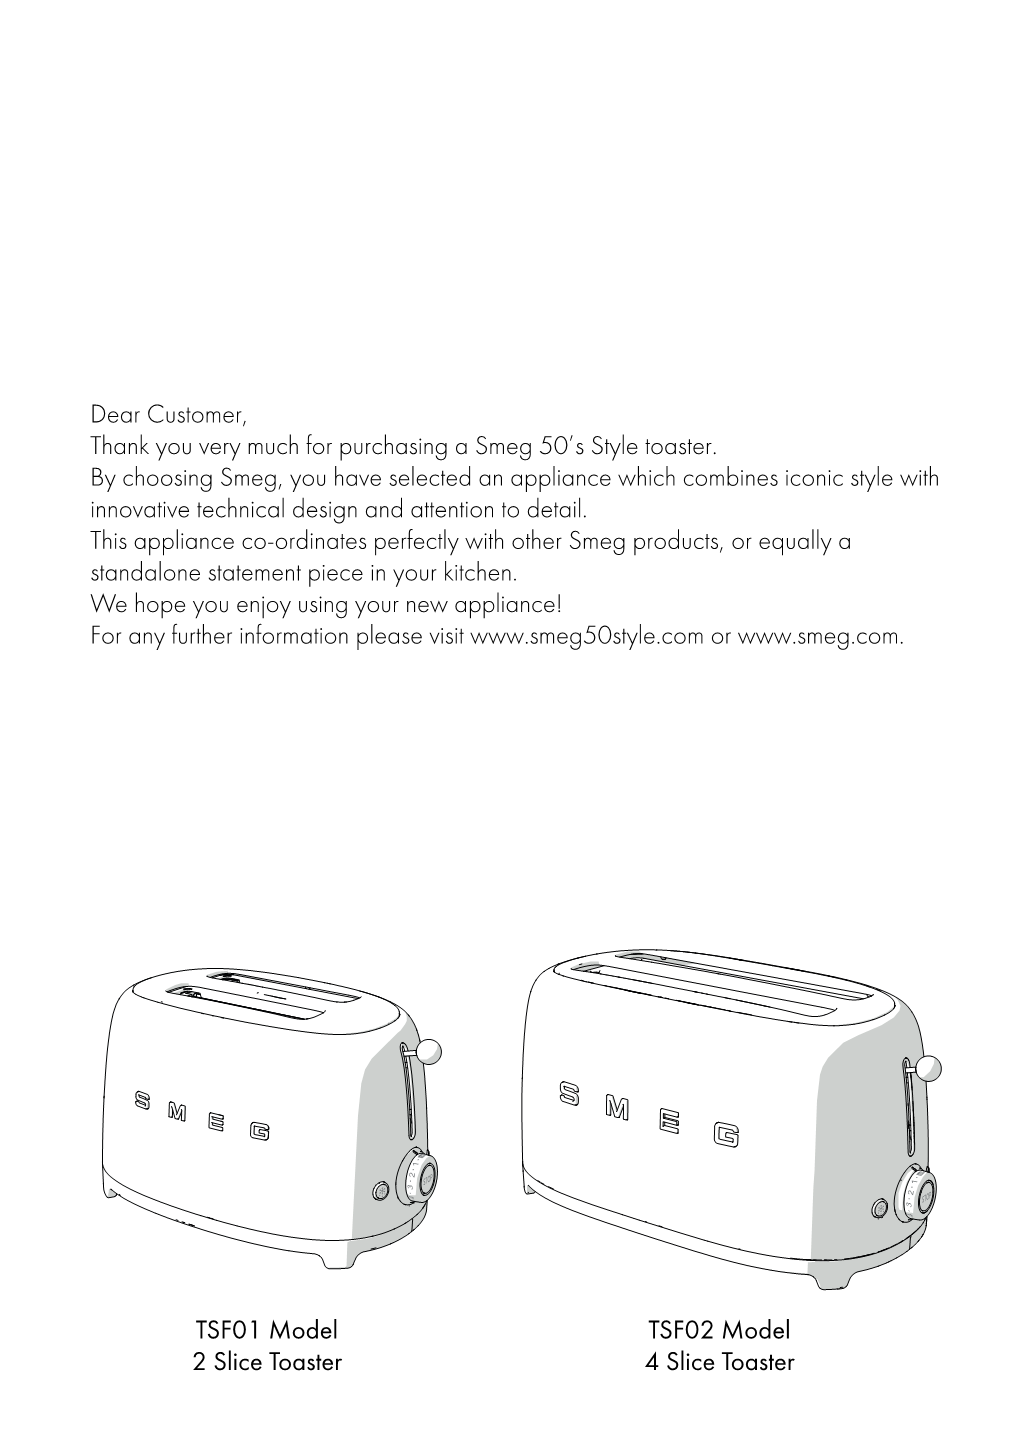 Dear Customer, Thank You Very Much for Purchasing a Smeg 50'S Style Toaster. by Choosing Smeg, You Have Selected an Appliance